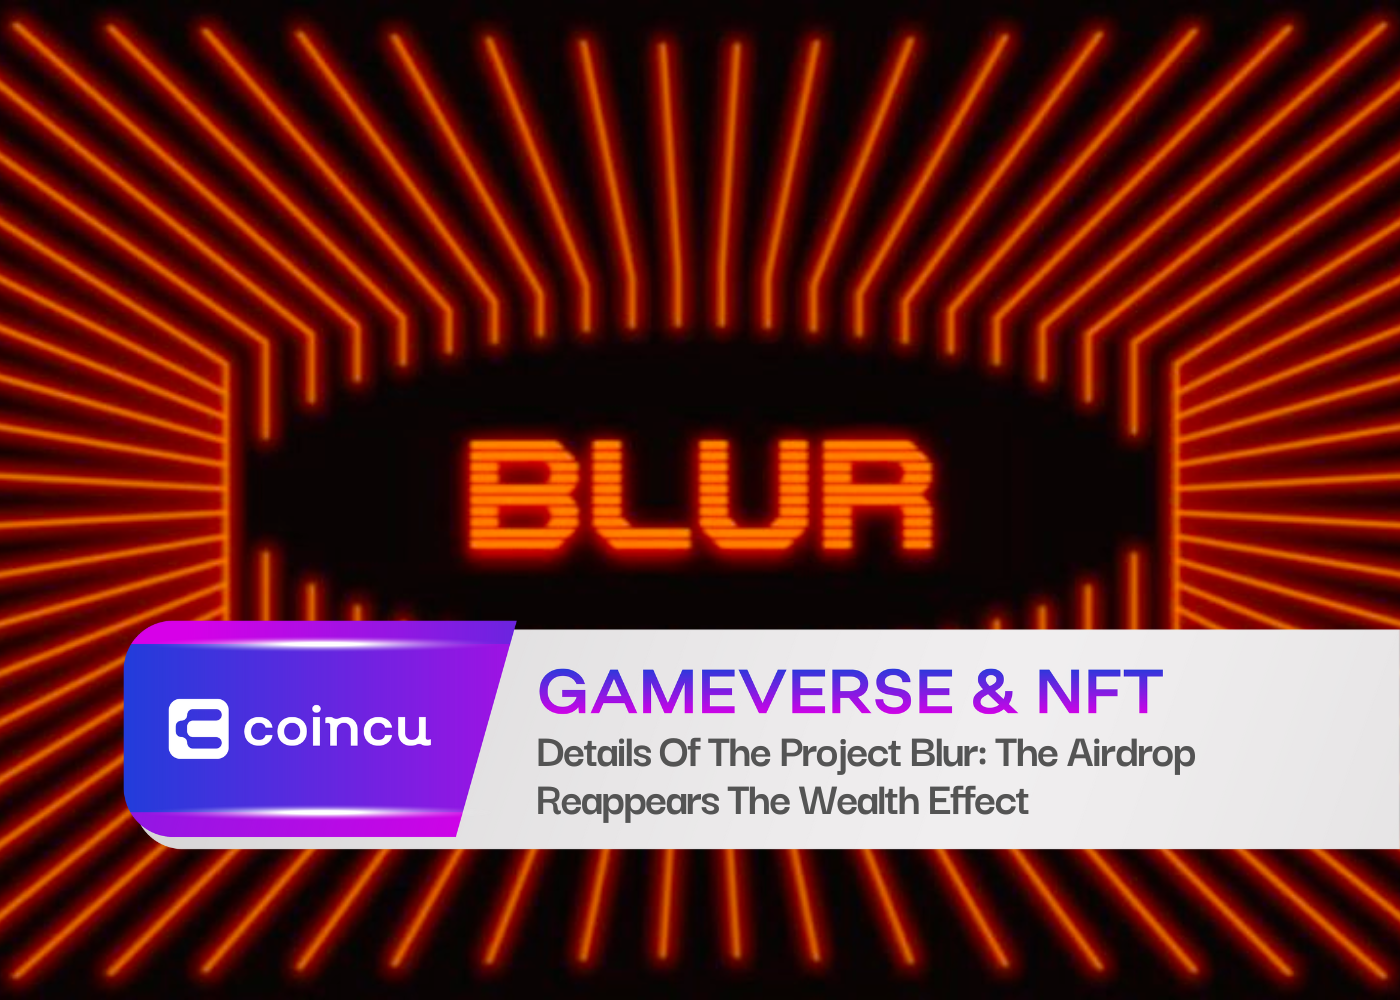 Details Of The Project Blur: The Airdrop Reappears The Wealth Effect